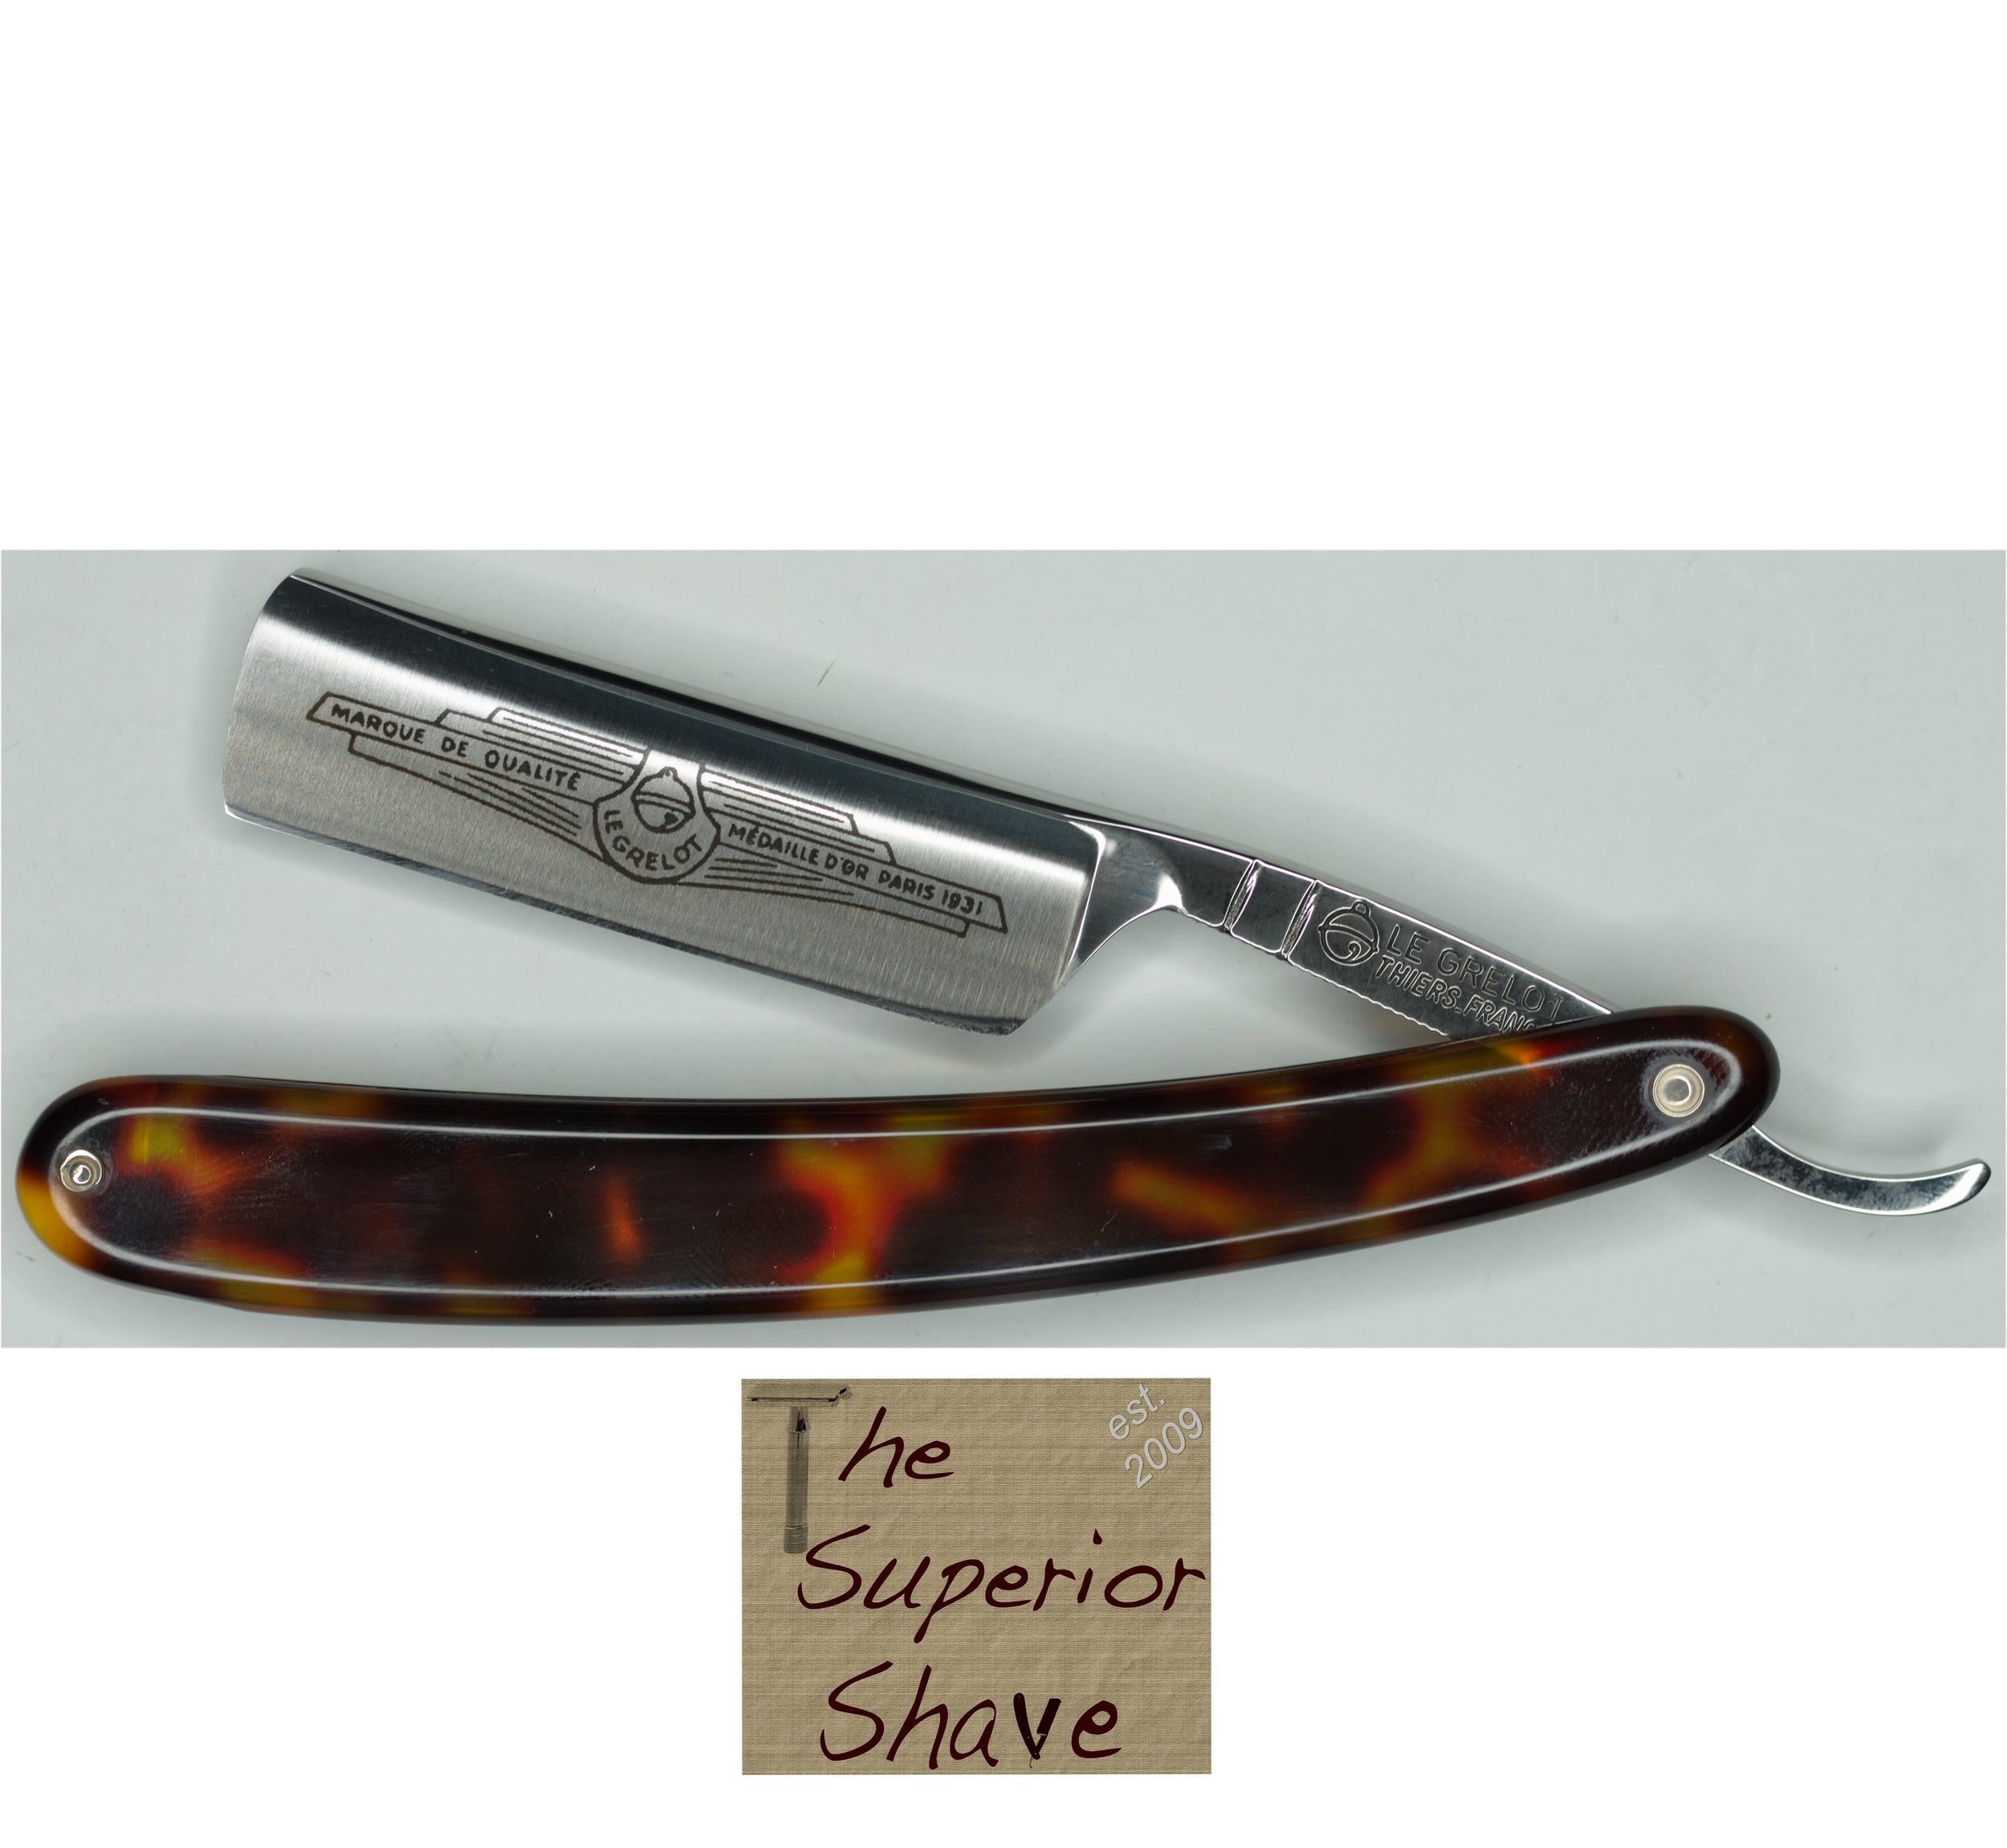 Thiers Issard 275 Le Grelot French Straight Razor